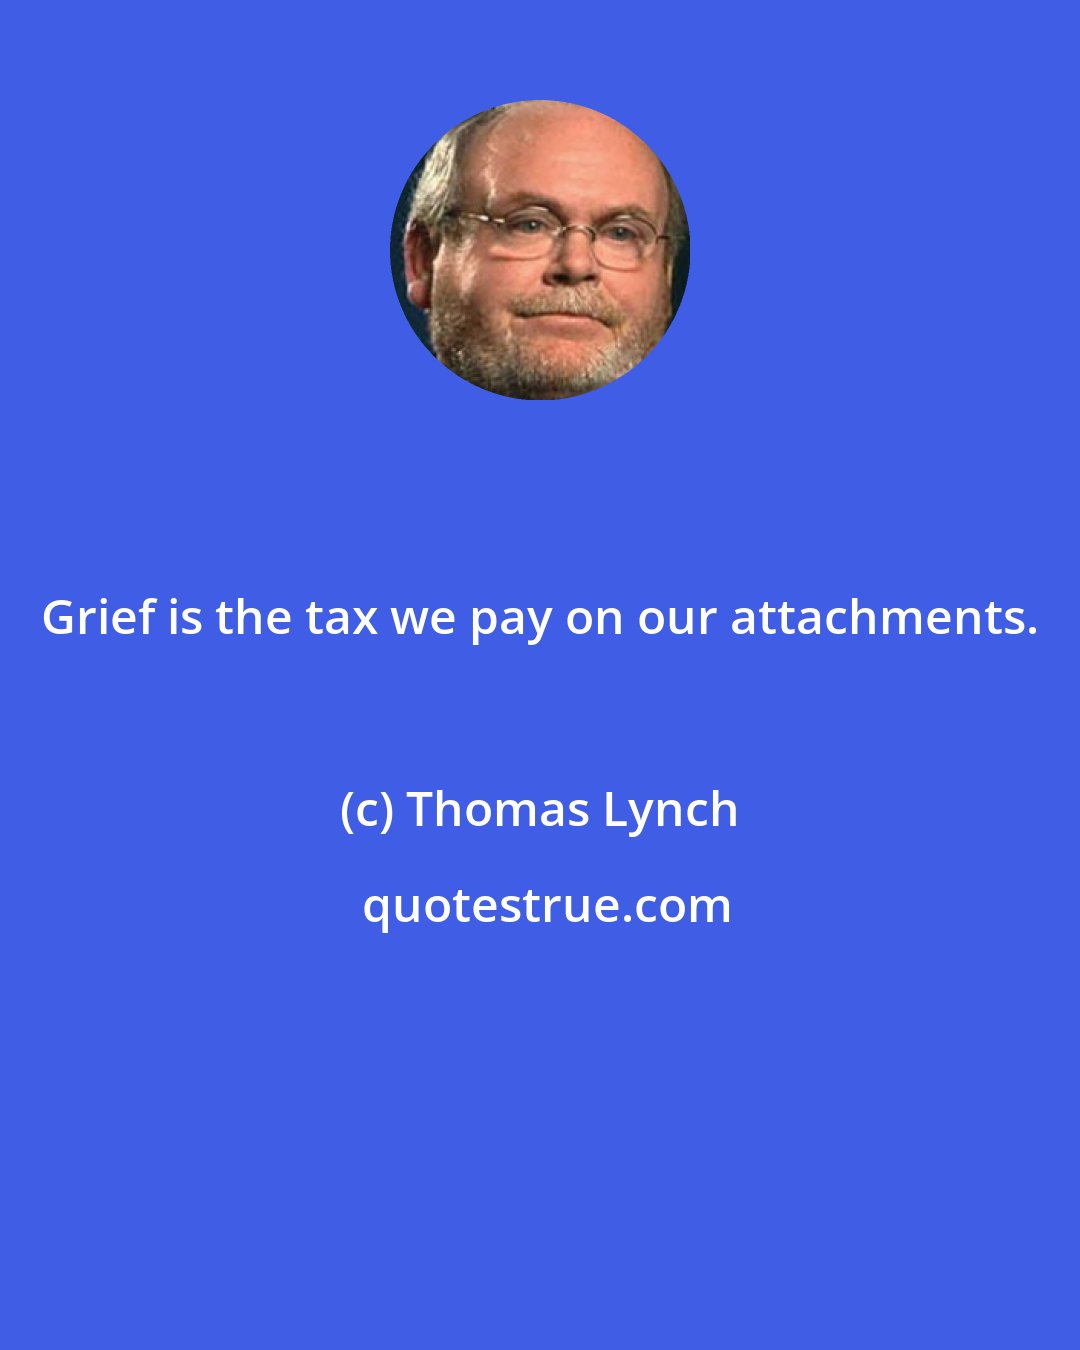 Thomas Lynch: Grief is the tax we pay on our attachments.